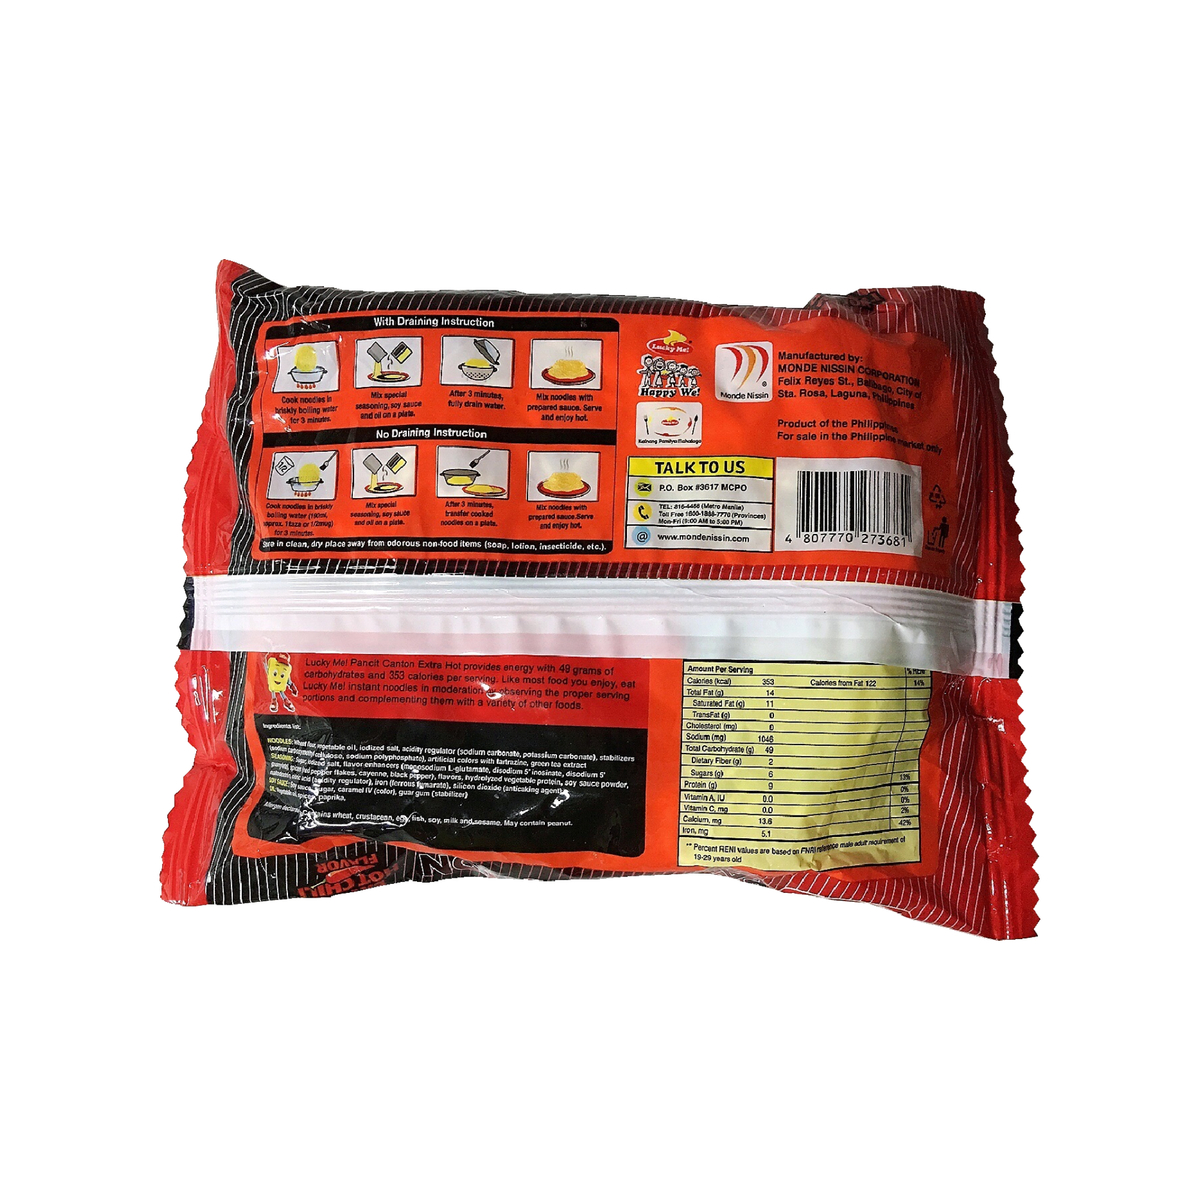 Lucky Me Instant Pancit Canton Extra Hot Chili 80g